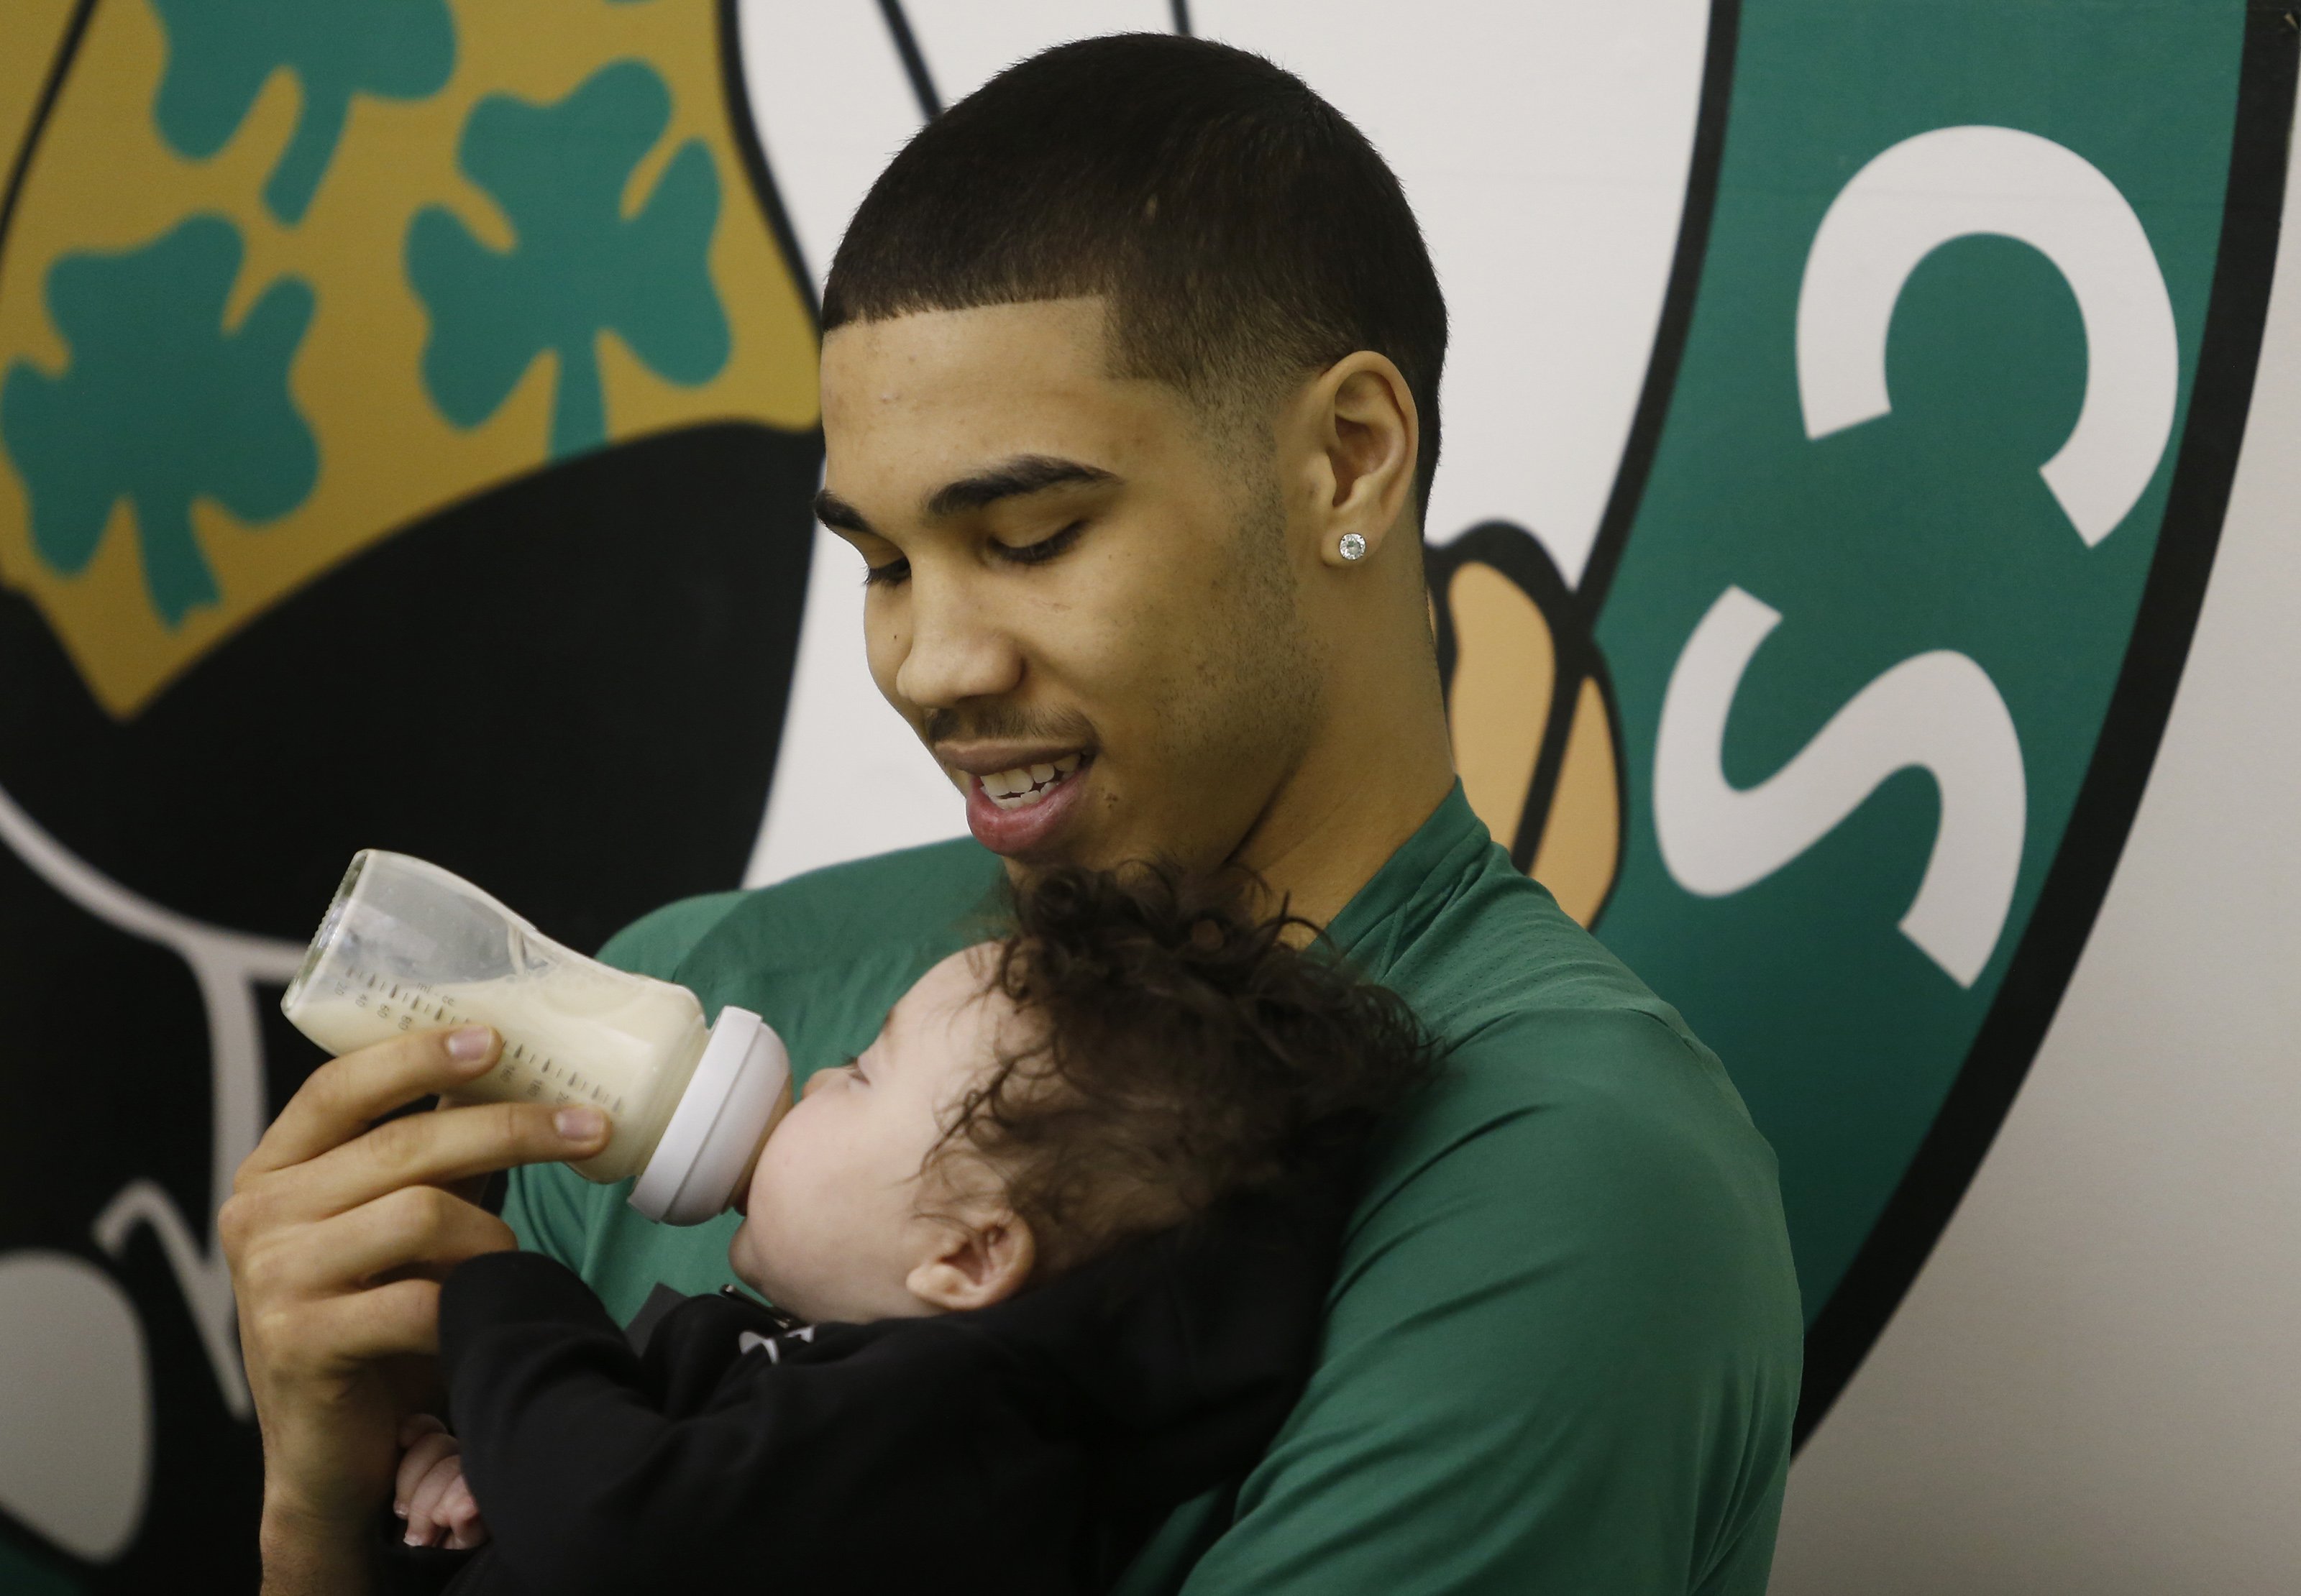 Boston Celtics' Jayson Tatum holds his son Jayson Tatum, Jr. as he takes part in a television interview following Boston Celtics practice in Waltham, MA on April 23, 2018. | Source: Getty Images